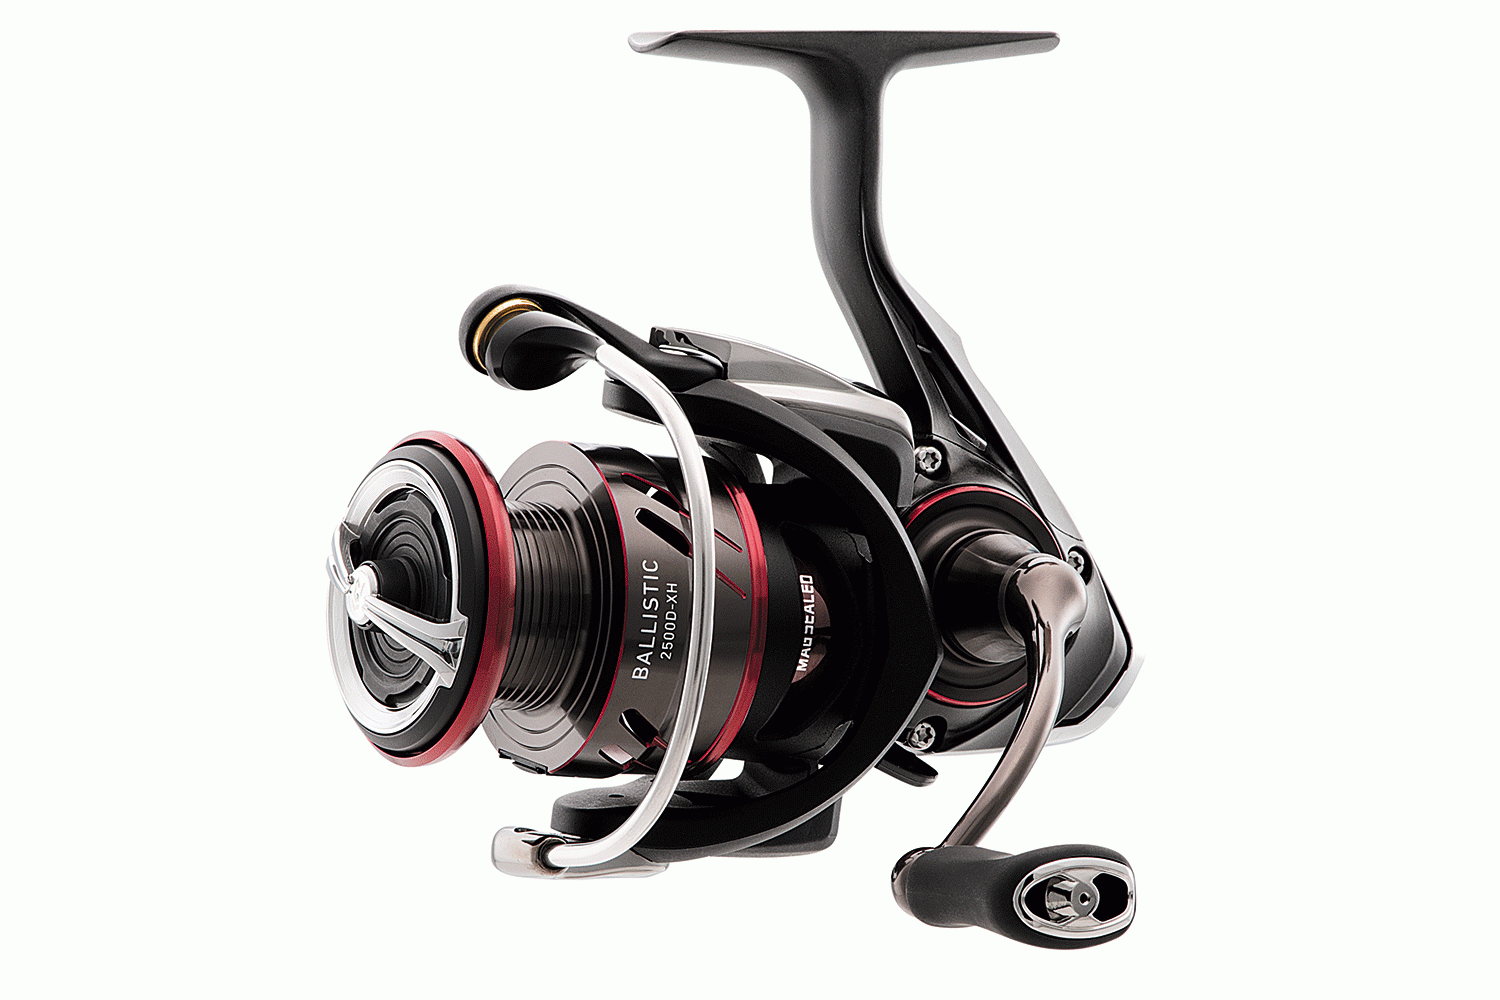 <p><b>Daiwa Ballistic LT, $229.99-$249.99</b></p> Daiwa is pleased to announce the introduction of a versatile line of spinning reels well suited for freshwater, inshore and offshore applications. The Ballistic LT series of spinning reels were designed lighter and stronger in a more compact package. The strength of the Zaion housing is an example of the LT design concept of light but tough. At the heart of the reel is a machined A7075 Aircraft Grade Aluminum DIGIGEAR designed for smoothness, strength and durability. The main shaft utilizes the Magseal which prevents water and debris intrusion. The reel is long-casting and extremely smooth employing a 7-Bearing System. With models ranging from 1000 to 6000 size the Ballistic LT line of spinning reels are designed for a wide range of gamefish incorporating many different techniques. The Ballistic LT series of reels is a prime example of Daiwaâs commitment to the LT Concept of modern spinning reel design, smaller, lighter yet stronger. <br> <a href=